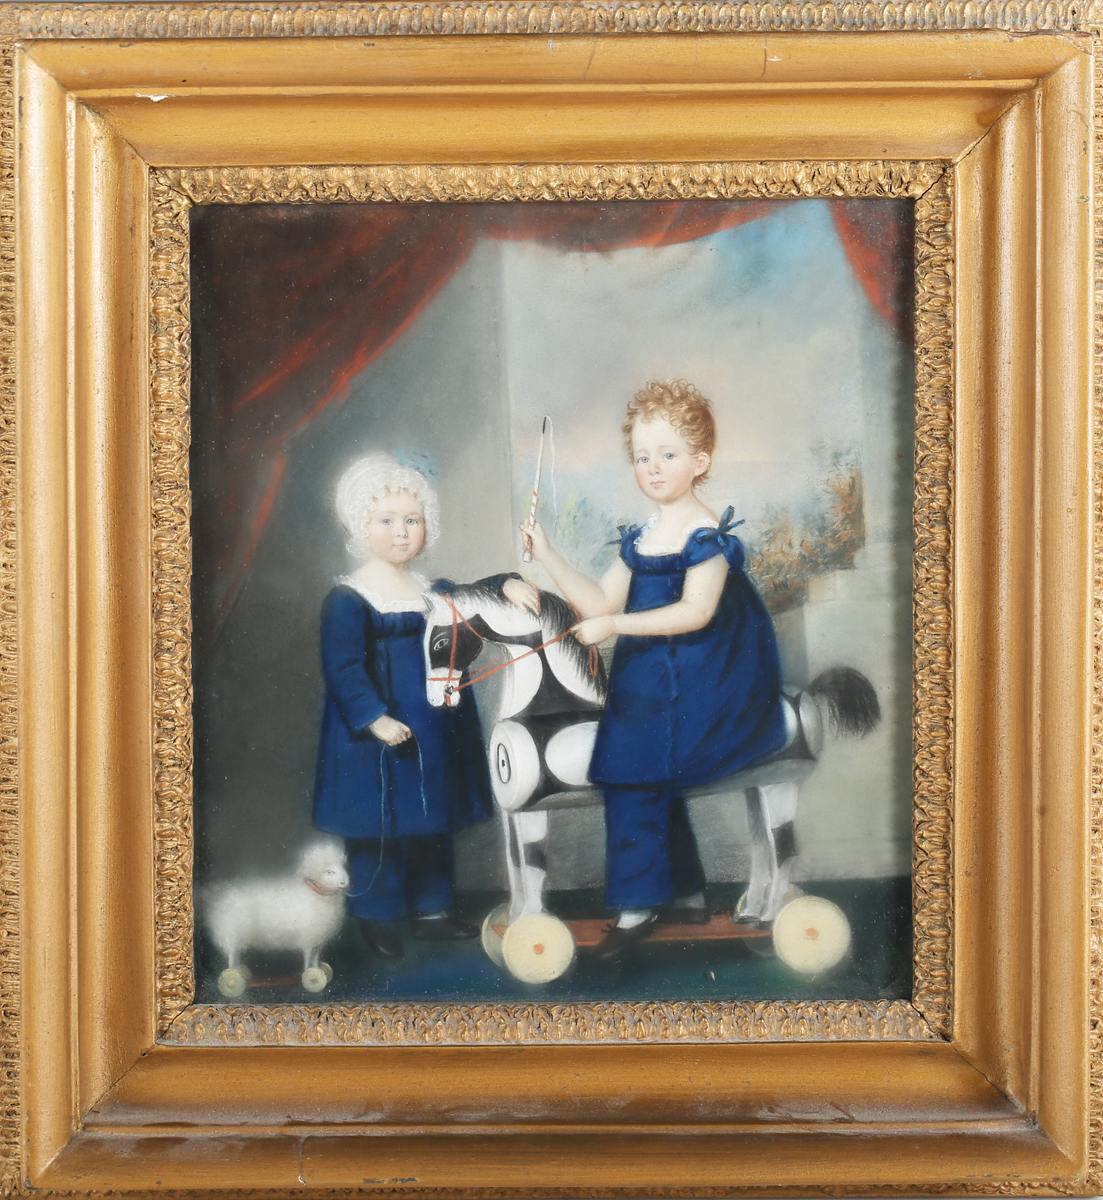 Circle of Adam Buck - Two Children in an Interior with Toy Wooden Horse and Toy Lamb, 19th century - Image 4 of 4